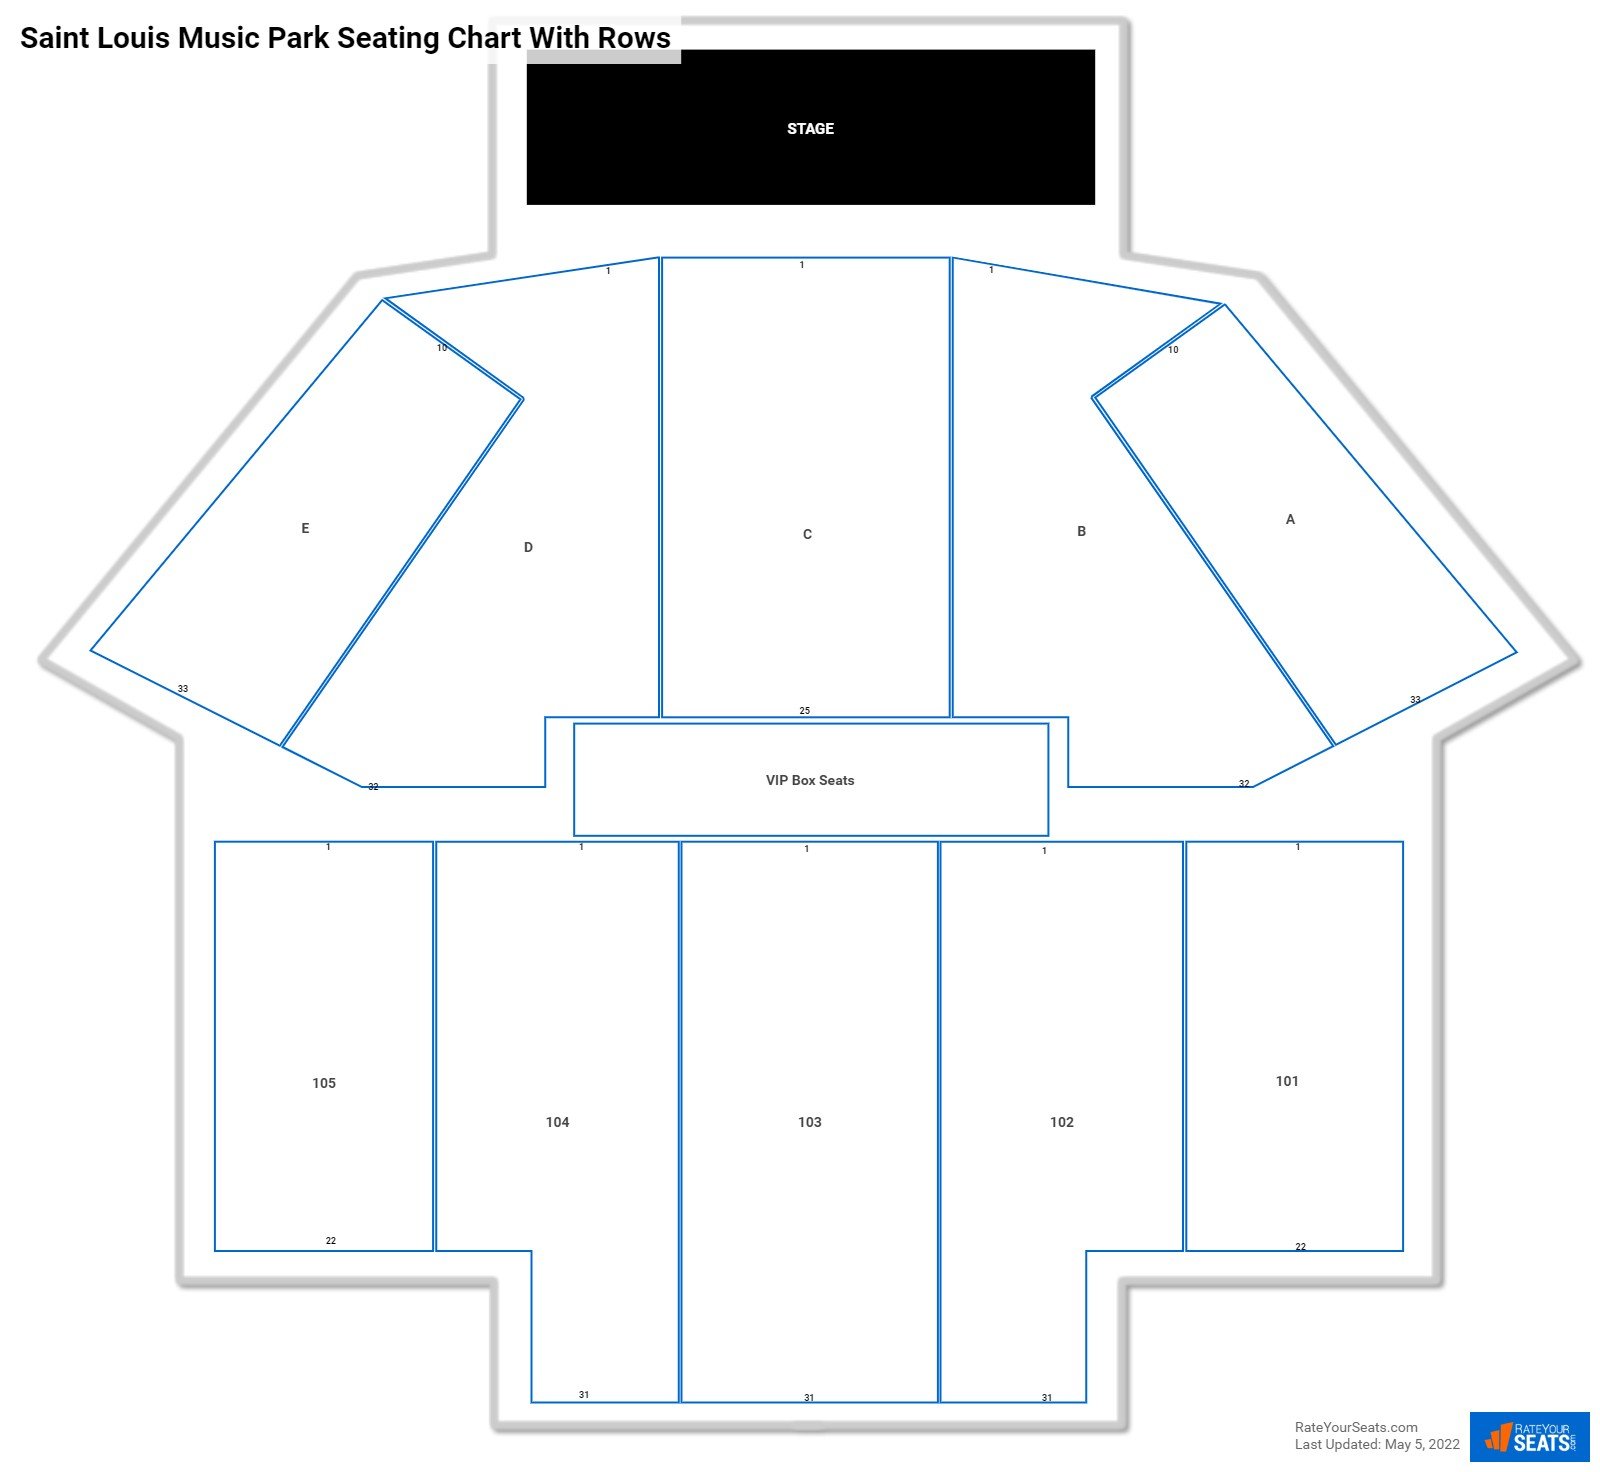 Saint Louis Music Park seating chart with row numbers